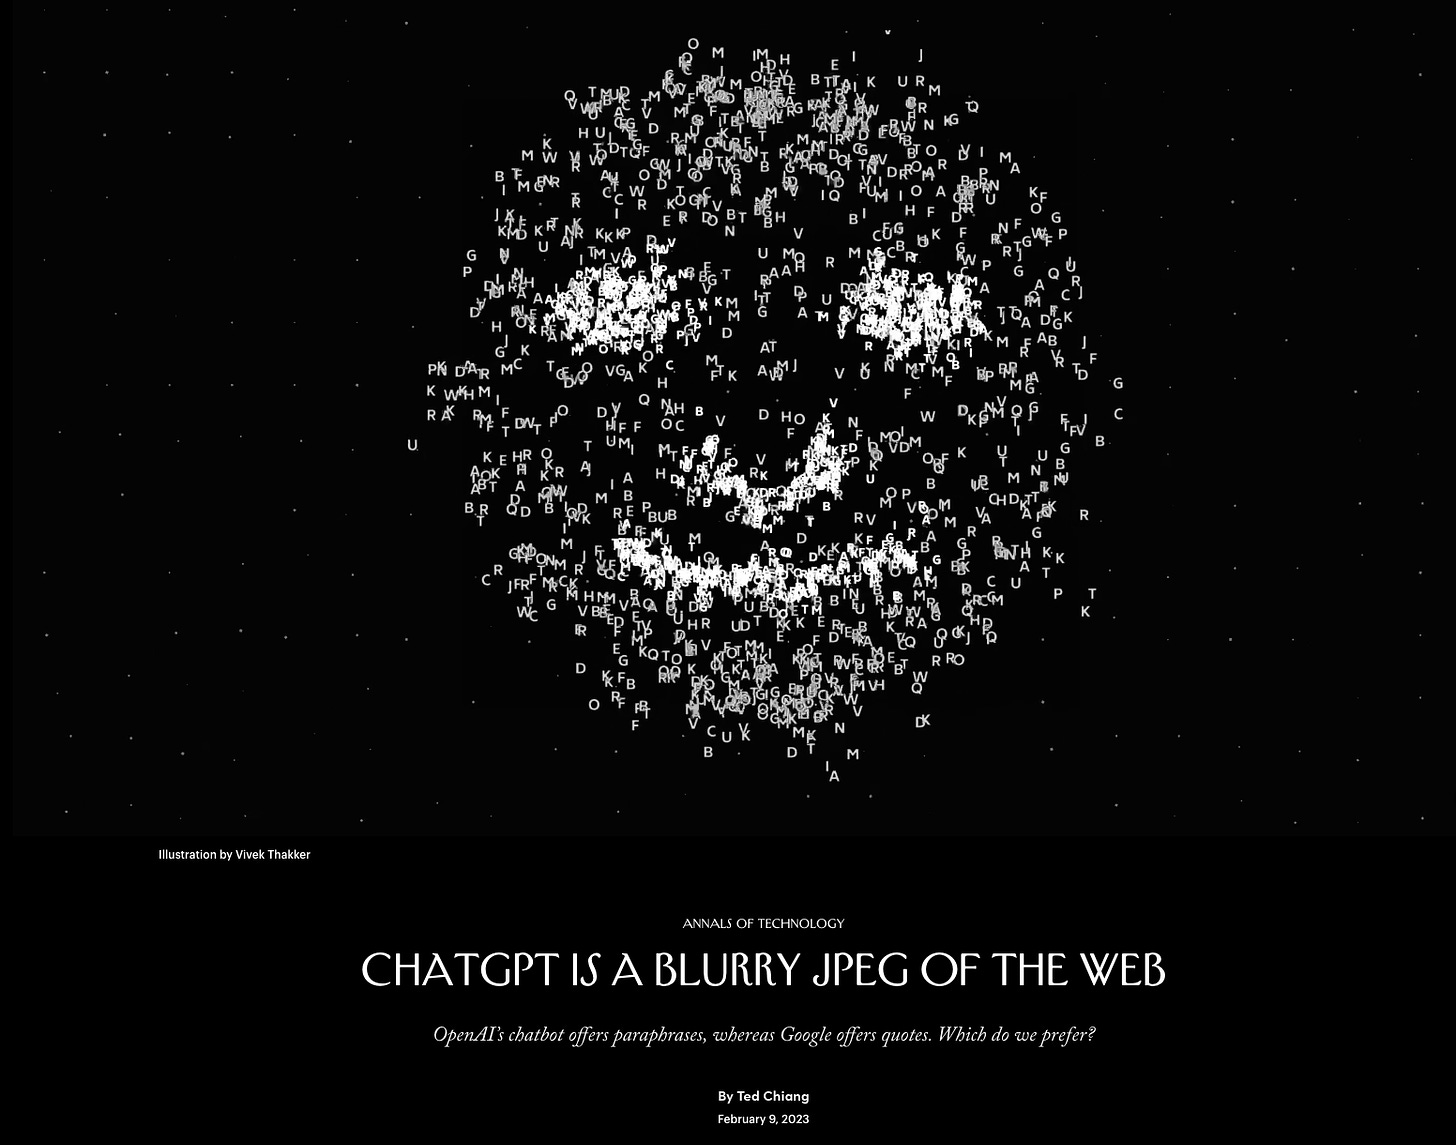 animated image revealing a smile created from aggregating letters